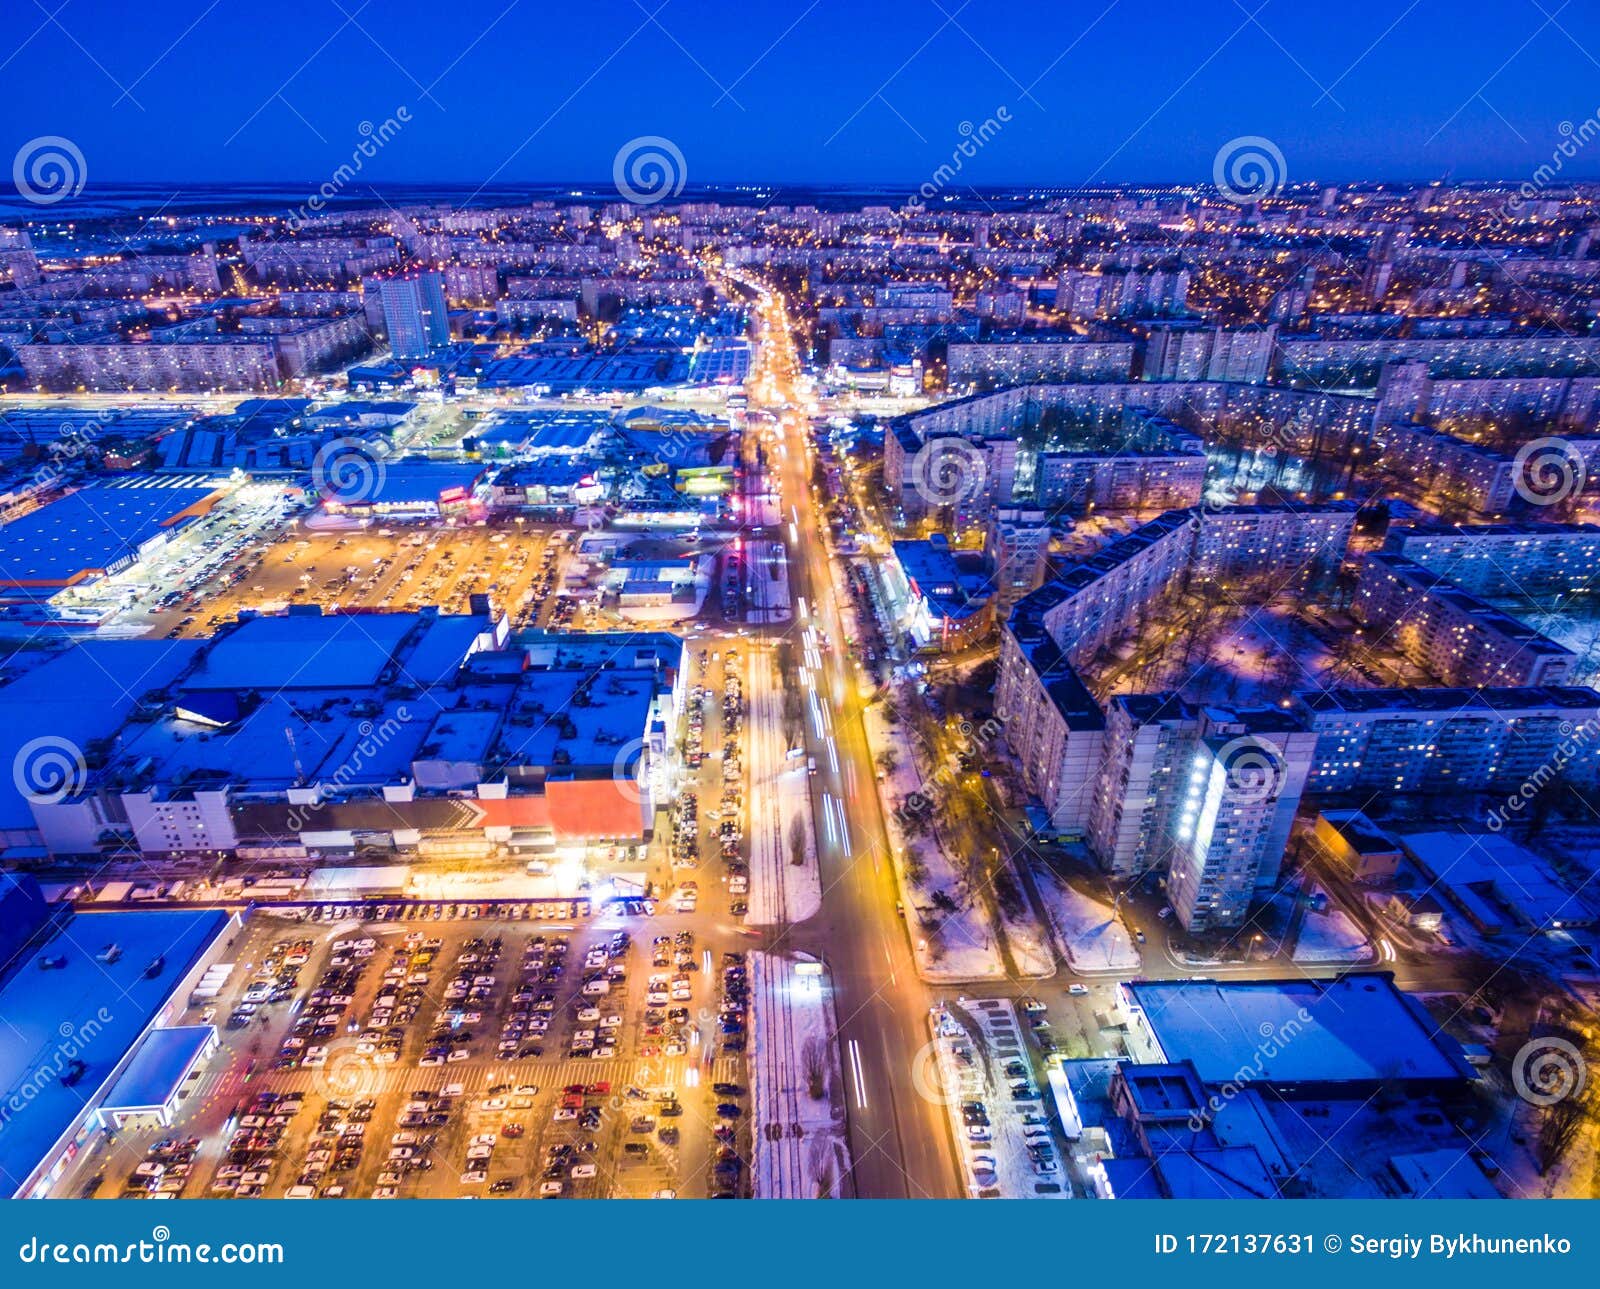 winter evening aerial view to residential area in kharkiv, ukrai